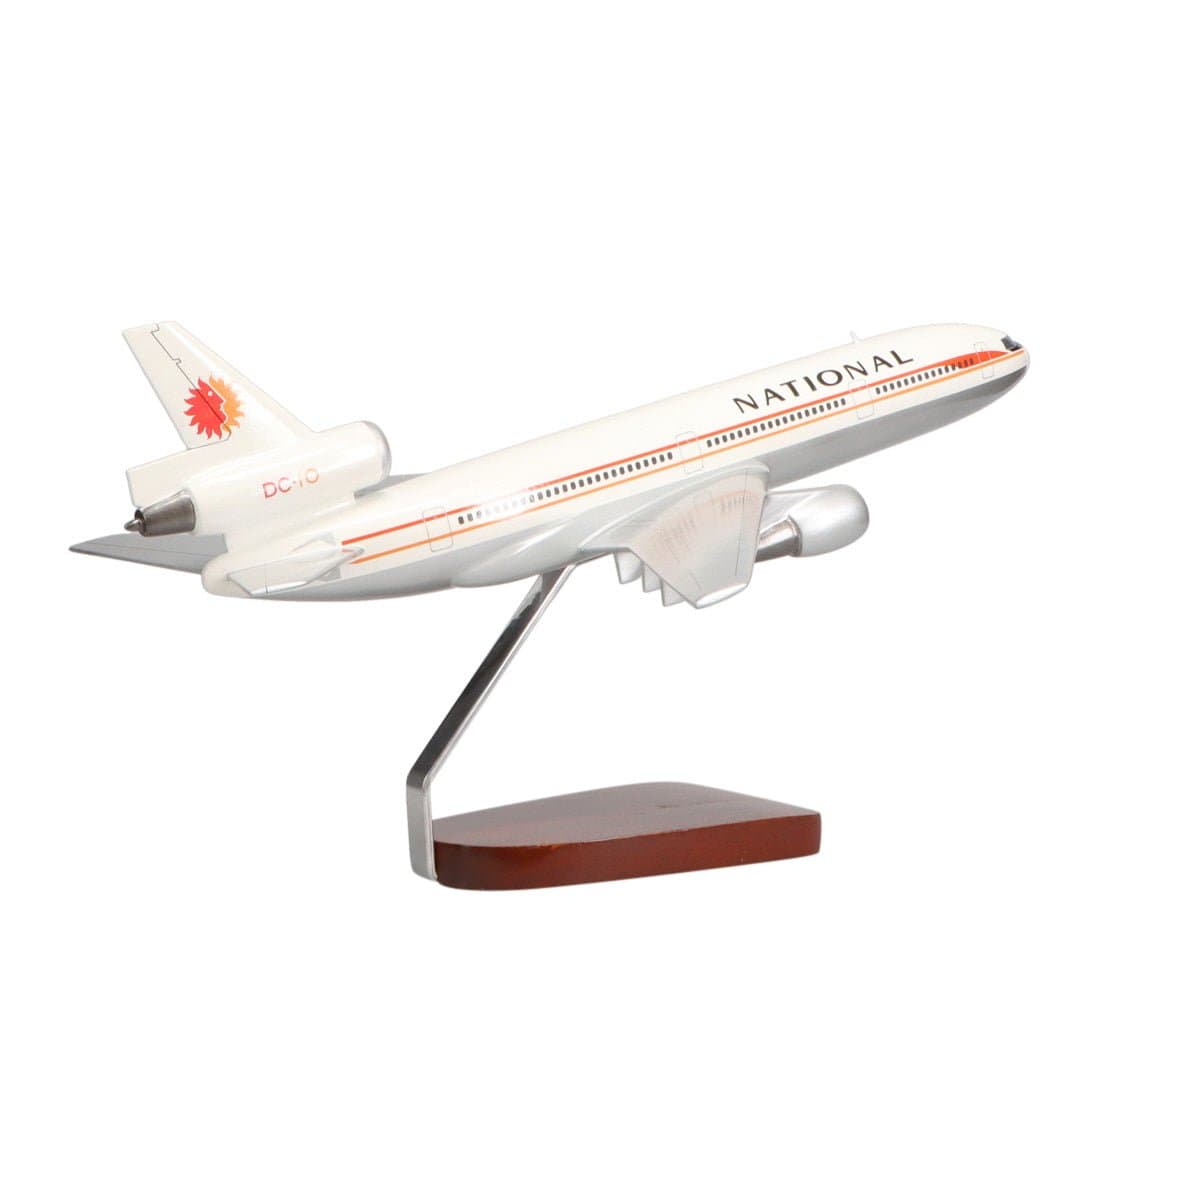 McDonnell Douglas DC-10 National Airlines Large Mahogany Model